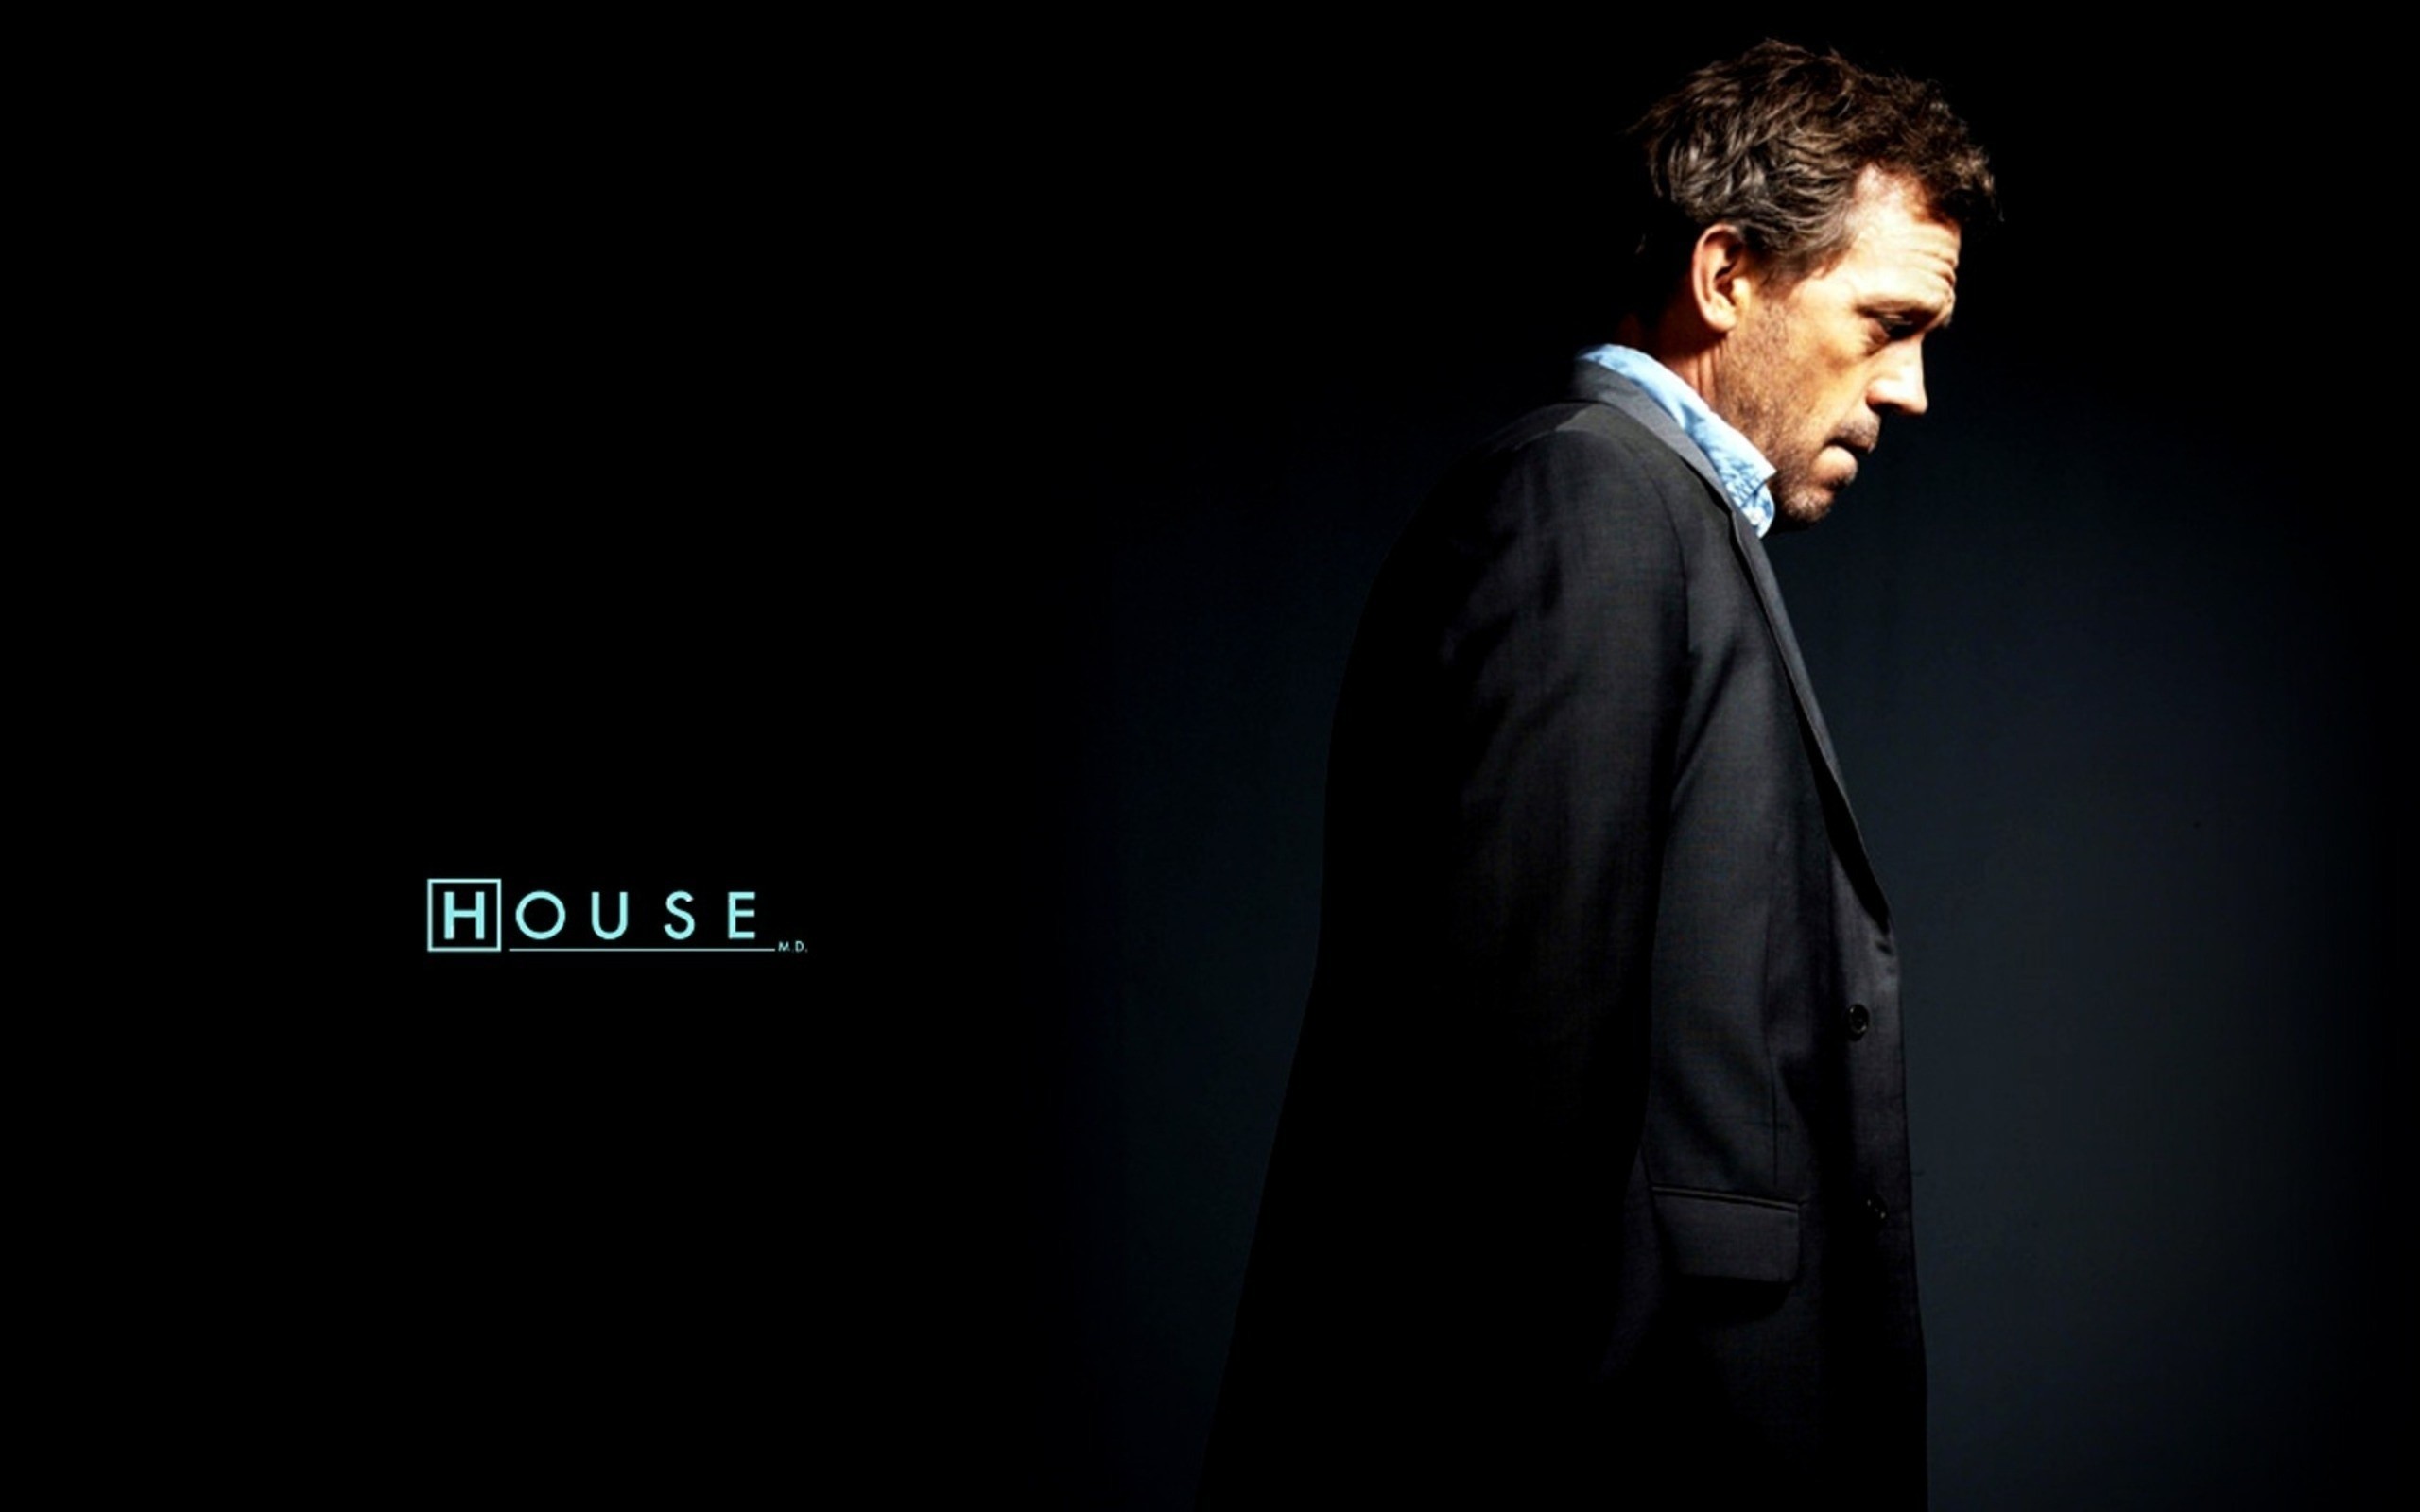 House md wallpaper